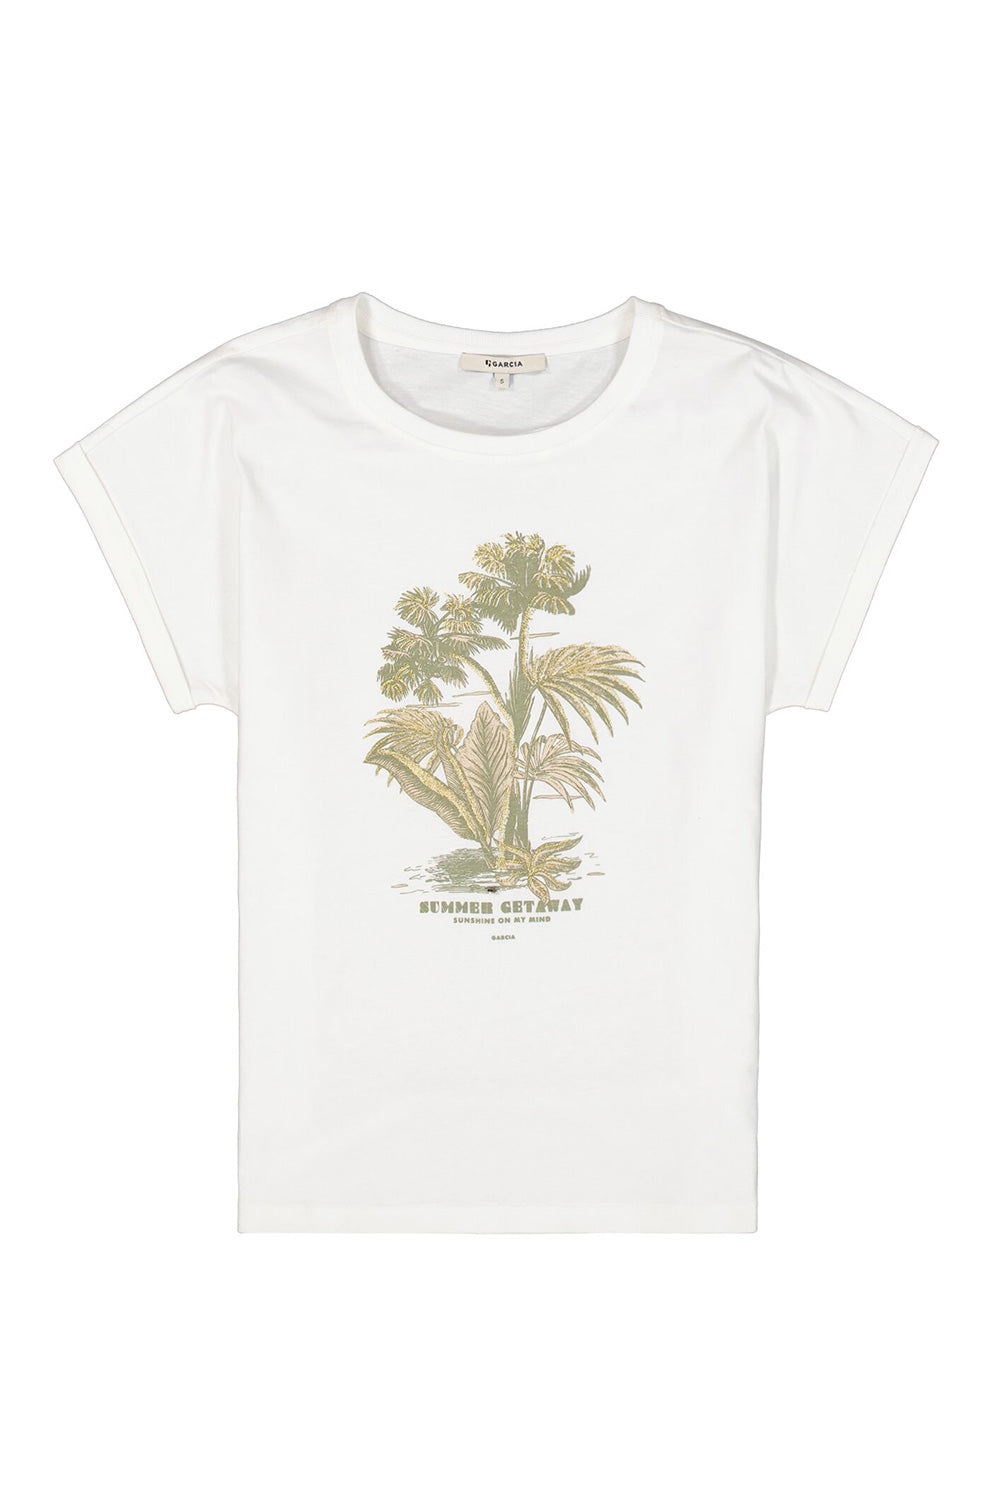 Garcia (Q40015) Women's Short Sleeve Palm Tree Graphic Tee With Golden Embroidery Accents in White